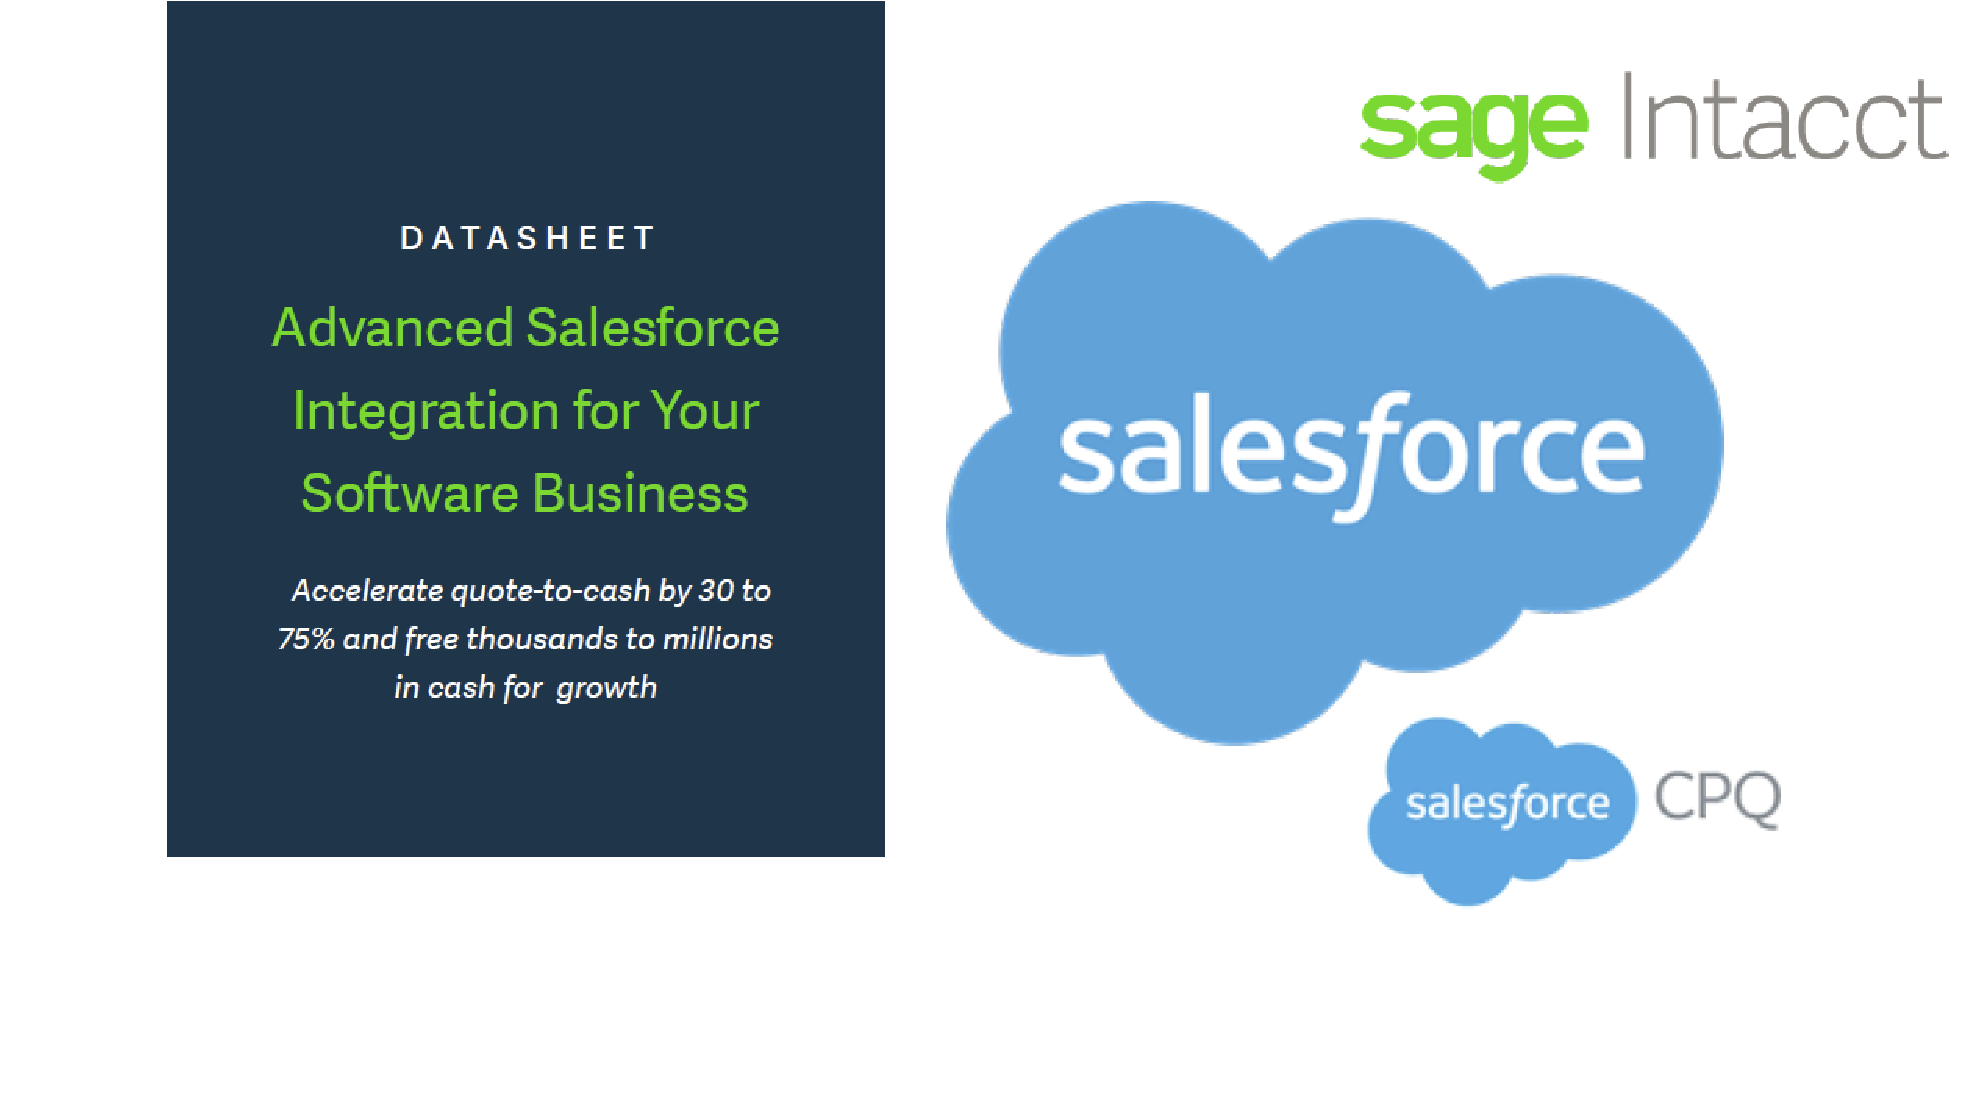 Sage Intacct - Advanced Salesforce Integration for Your Software Business